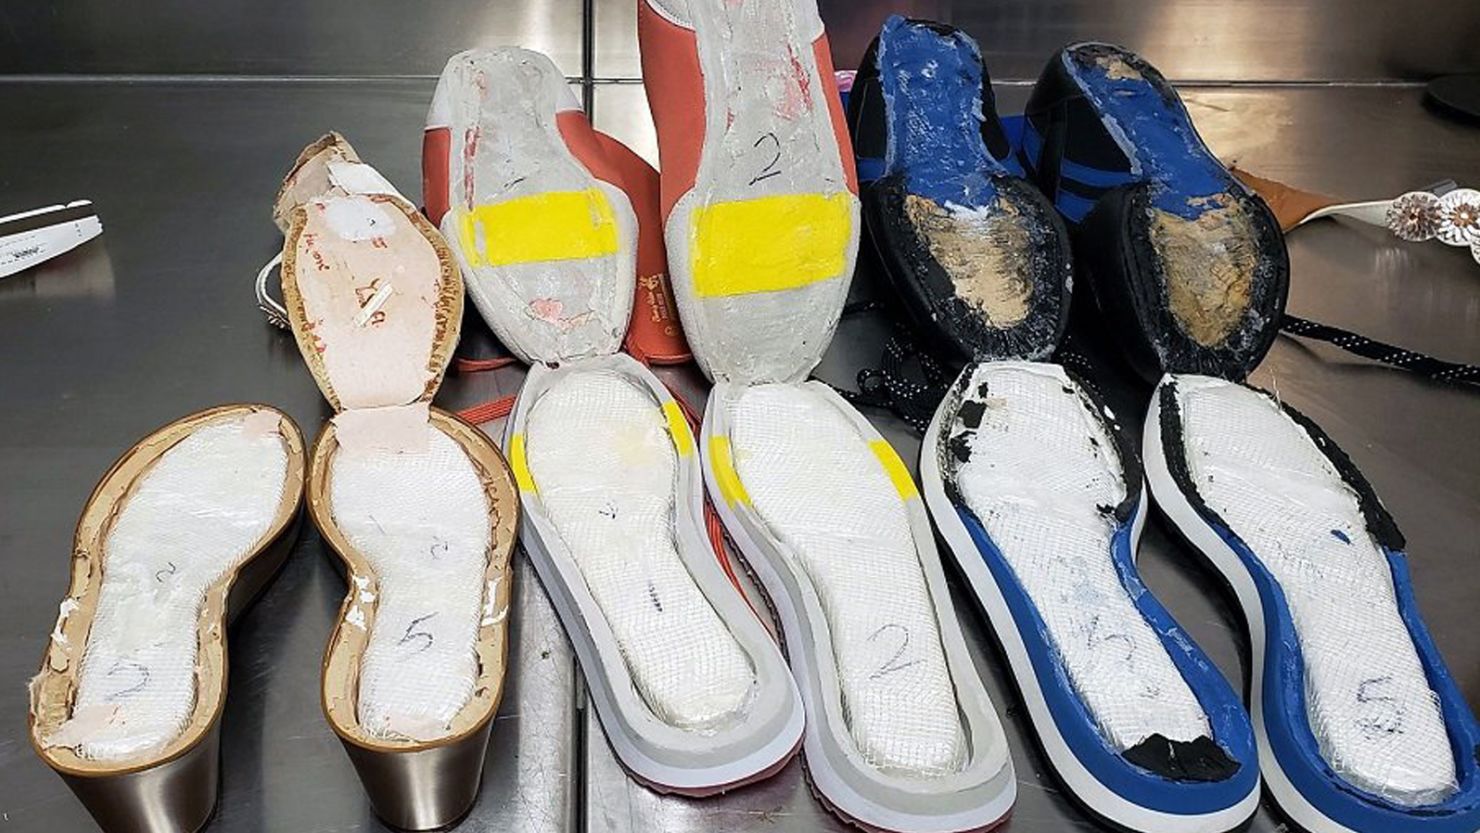 Border officials released this image showing some of the shoes with drugs in them.